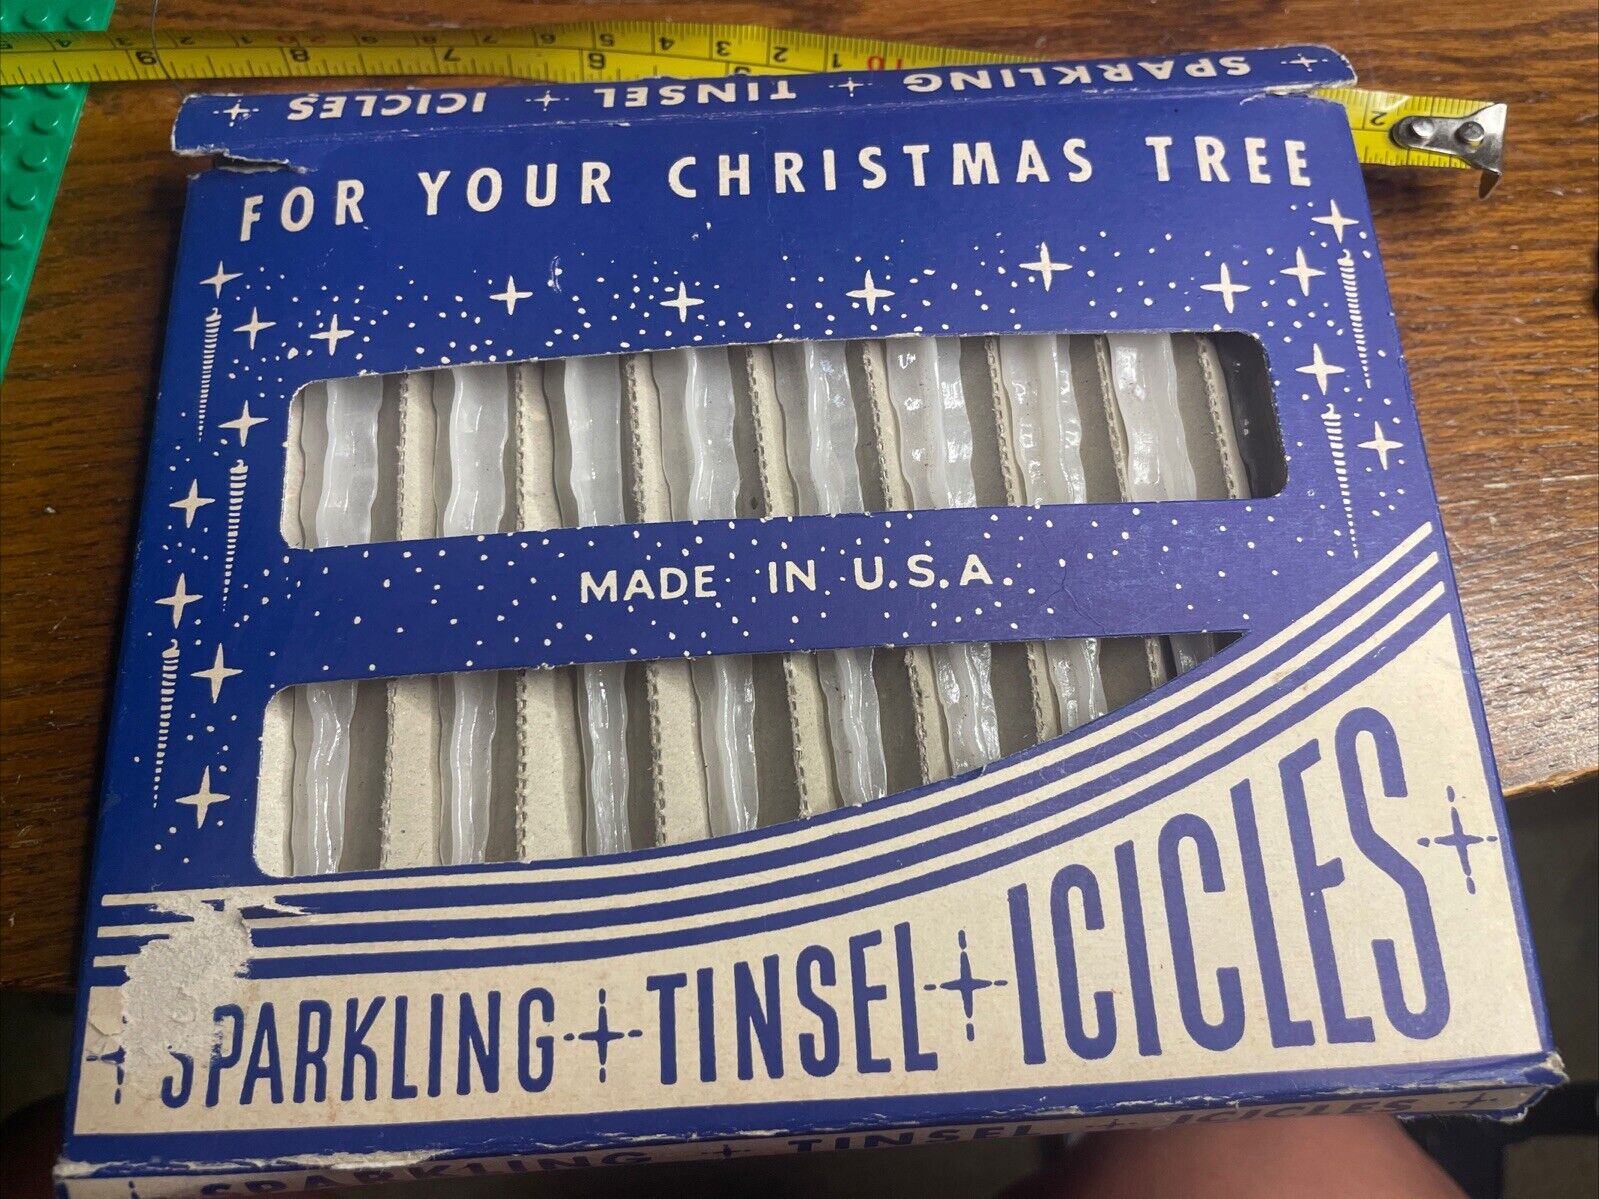 20 Vintage 1940’s Sparkling Tinsel Icicles Plastic Christmas Ornaments with Box.